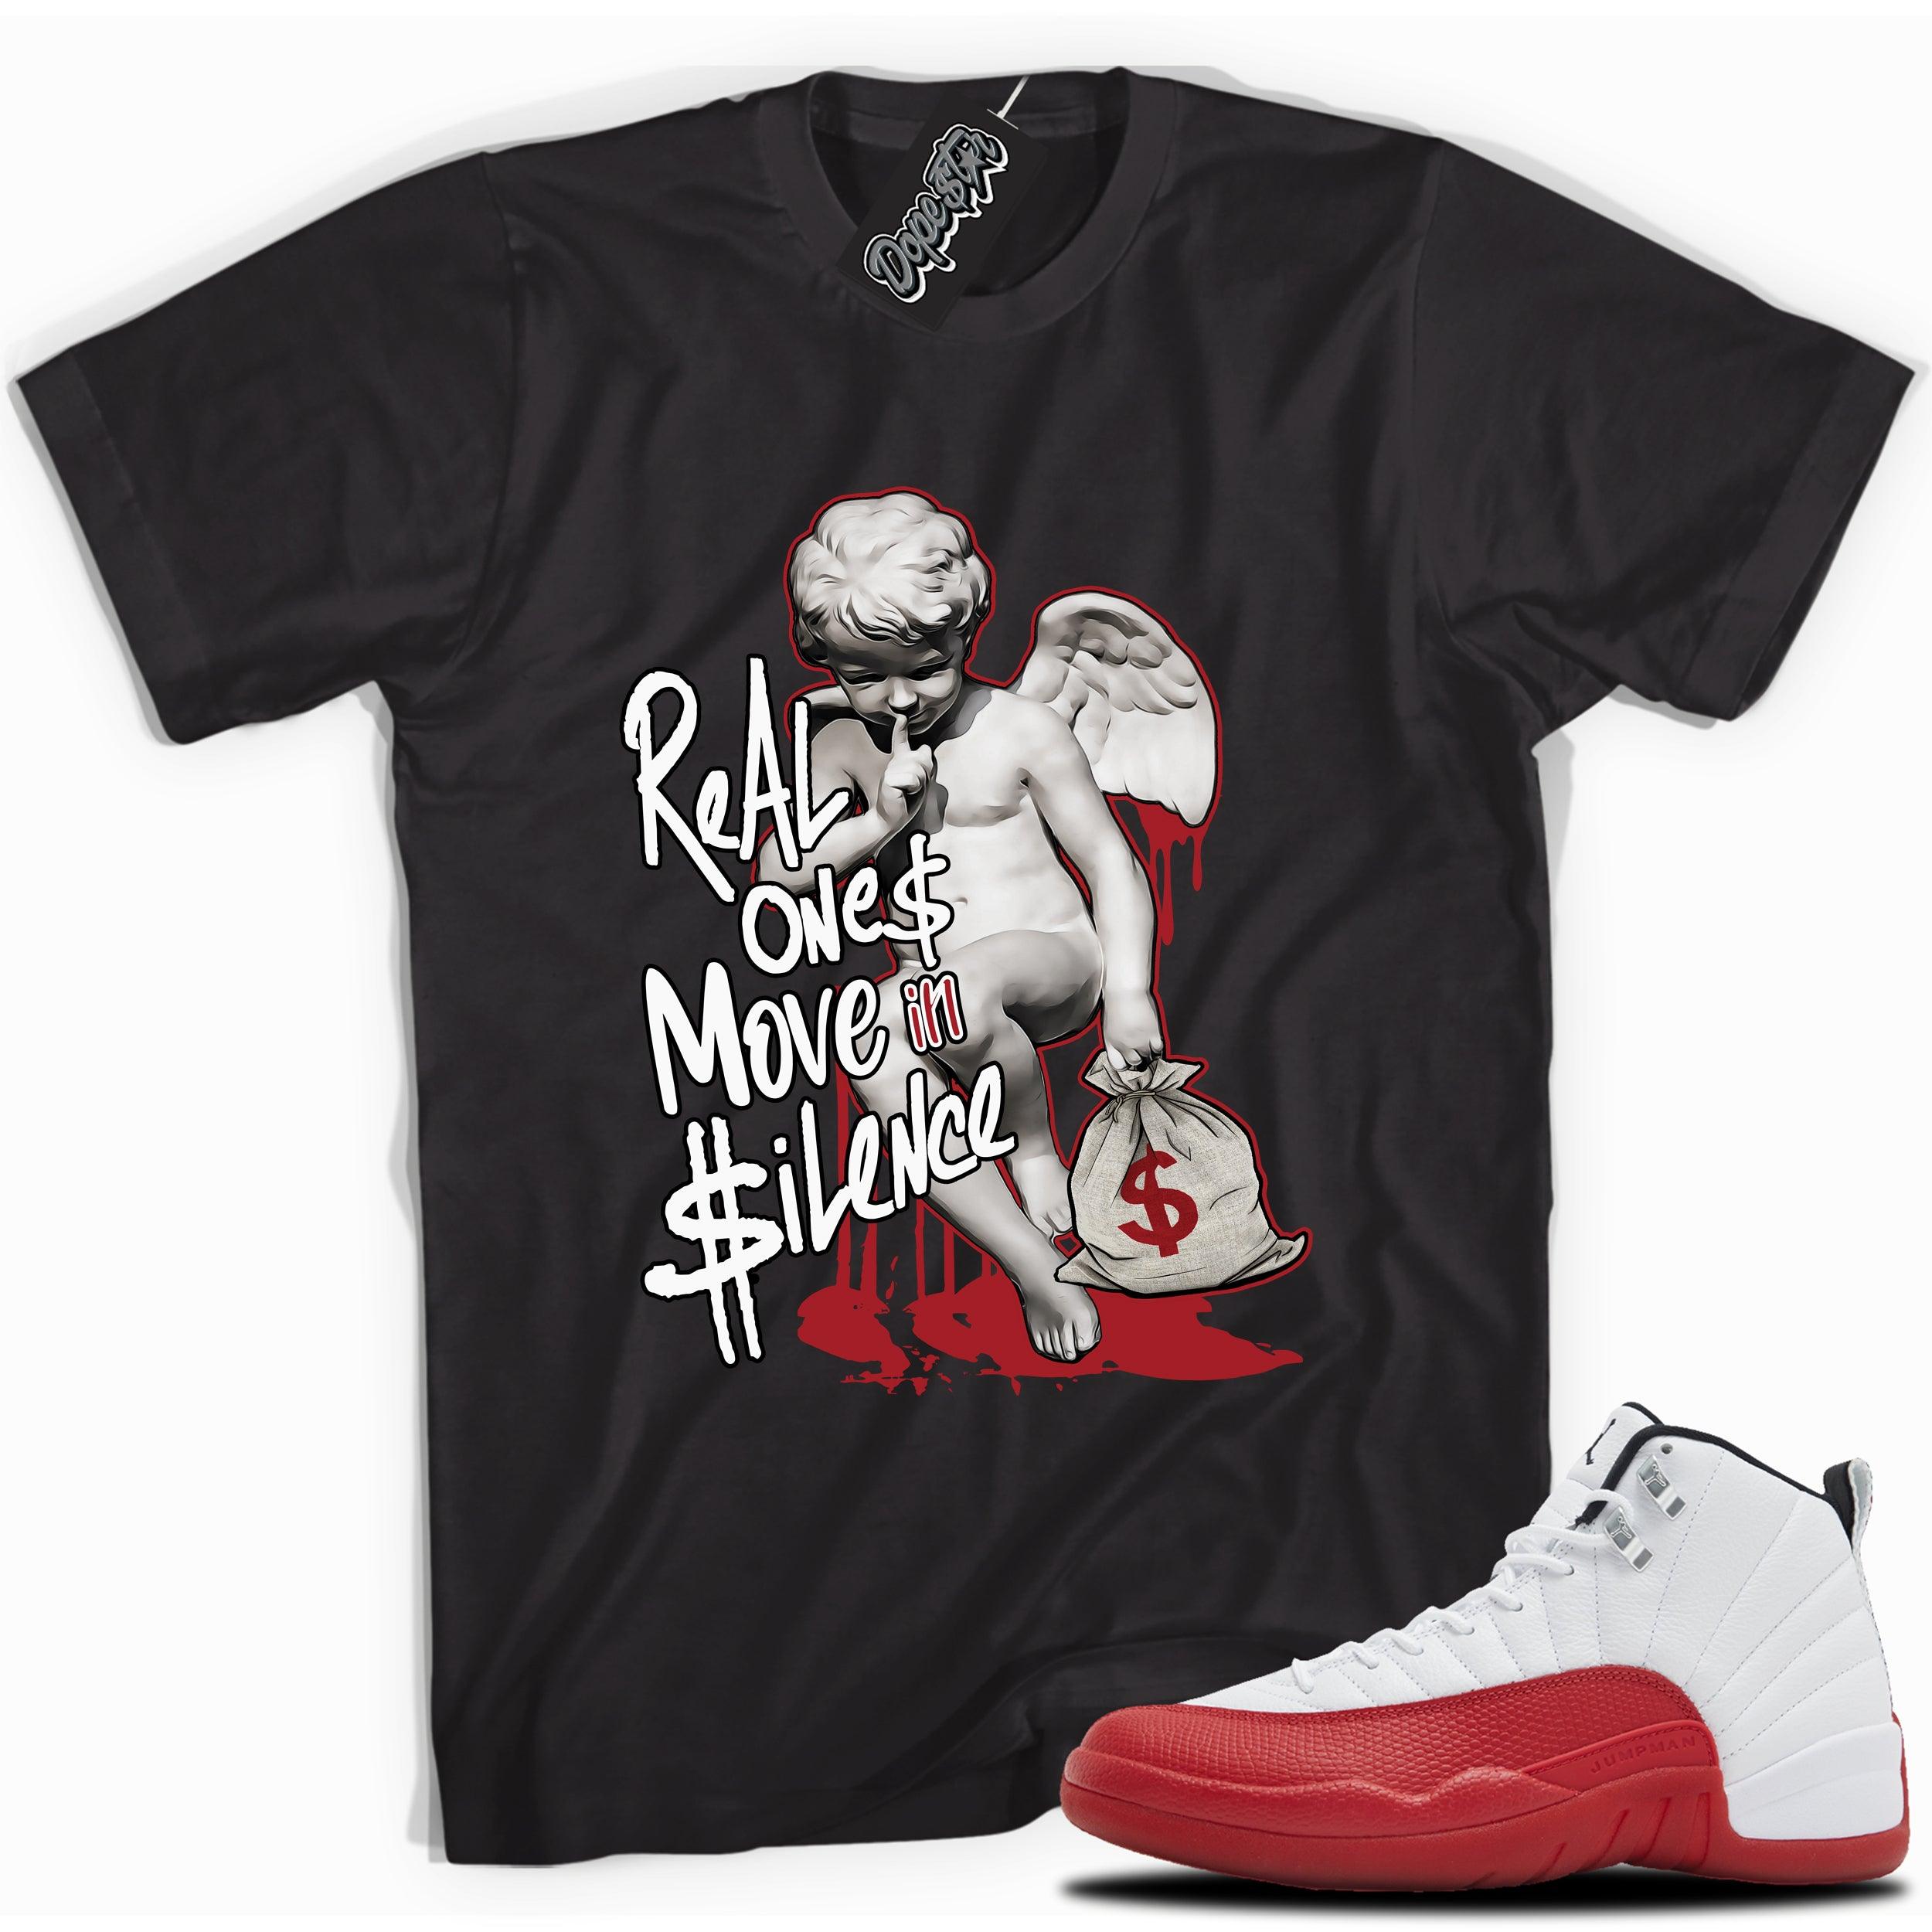 Cool Black graphic tee with “REAL ONES CHERUB” print, that perfectly matches Air Jordan 12 Retro Cherry Red 2023 red and white sneakers